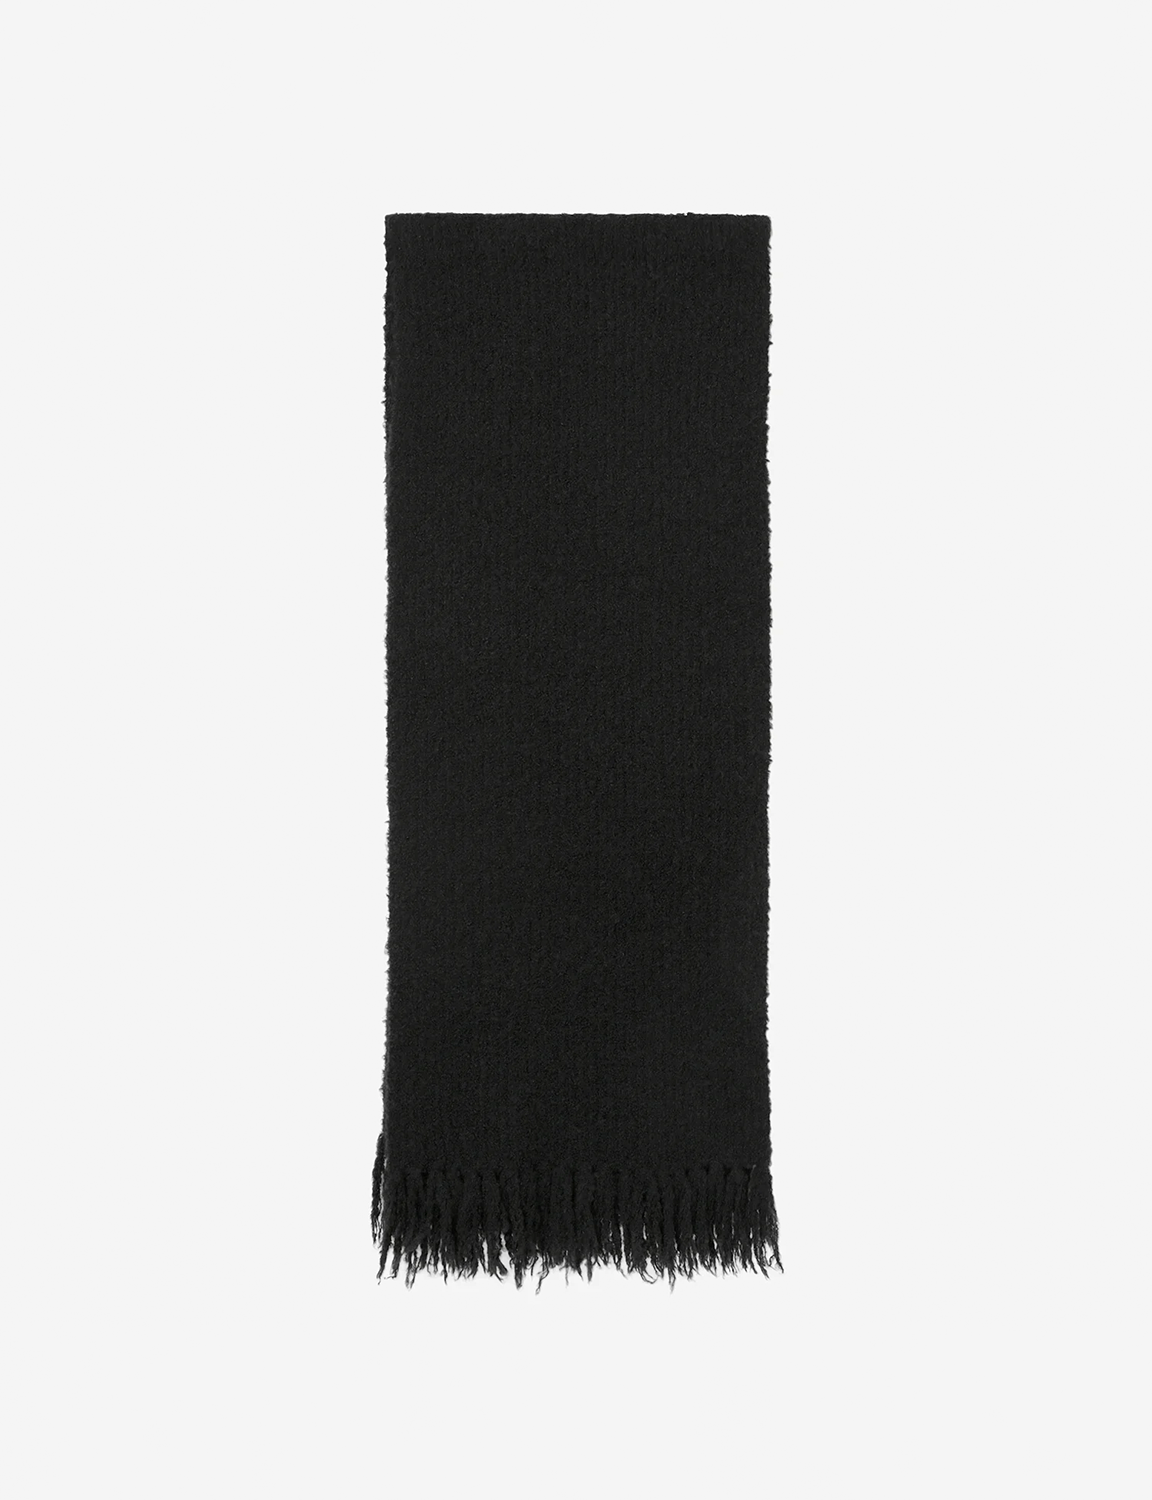 th products Inflated Scarf ティーエイチプロダクツ - ファッション